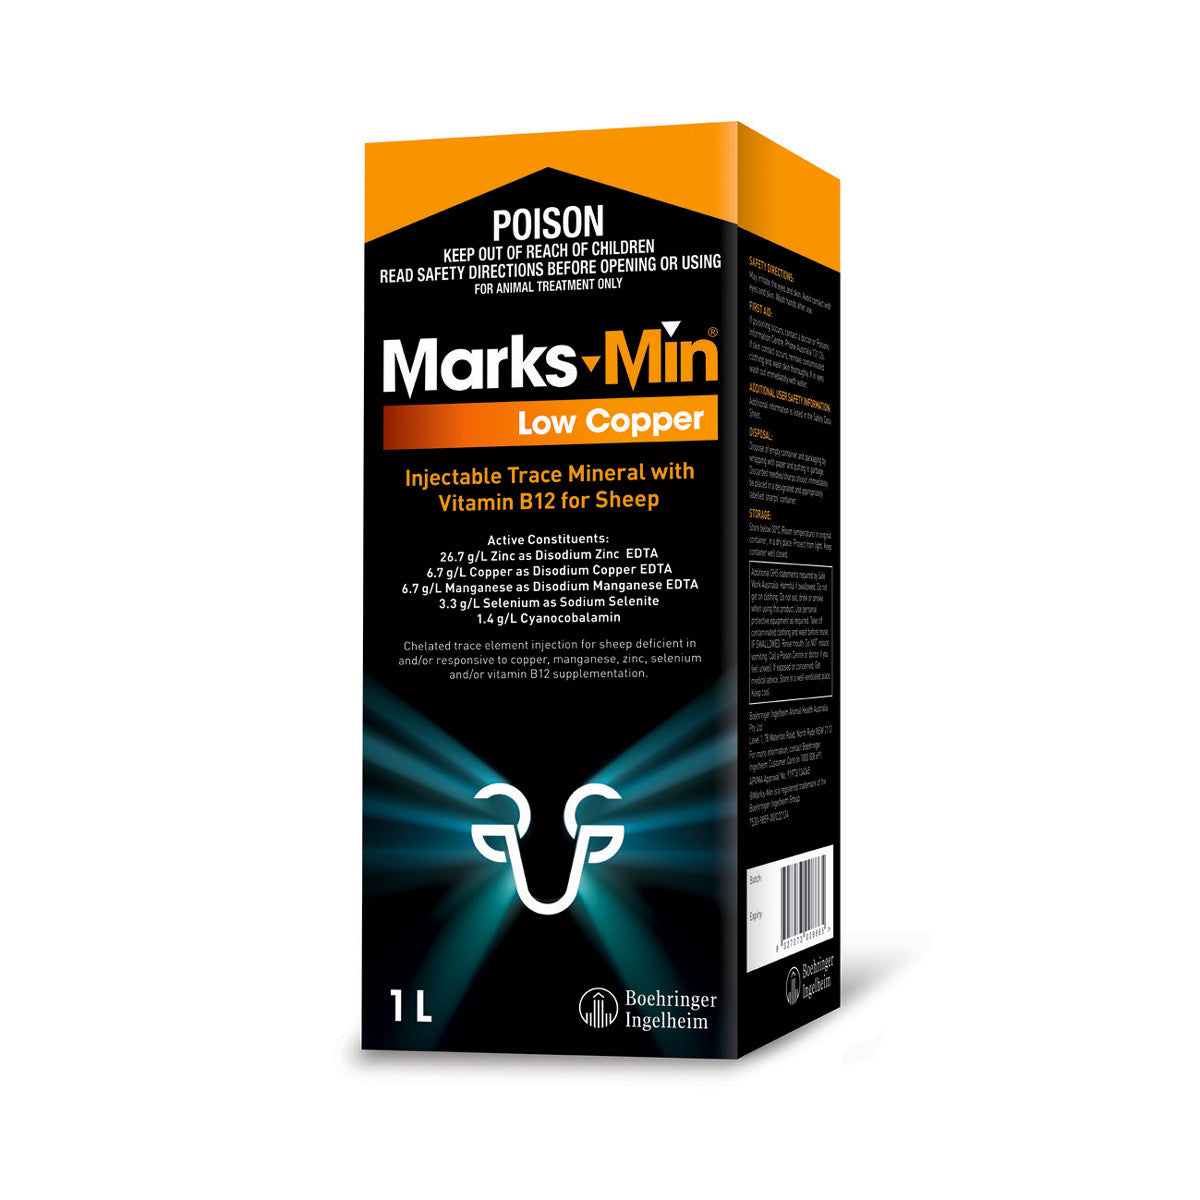 Marks-Min Low Copper Injectable Trace Mineral with Vitamin B12 for Sheep 1L